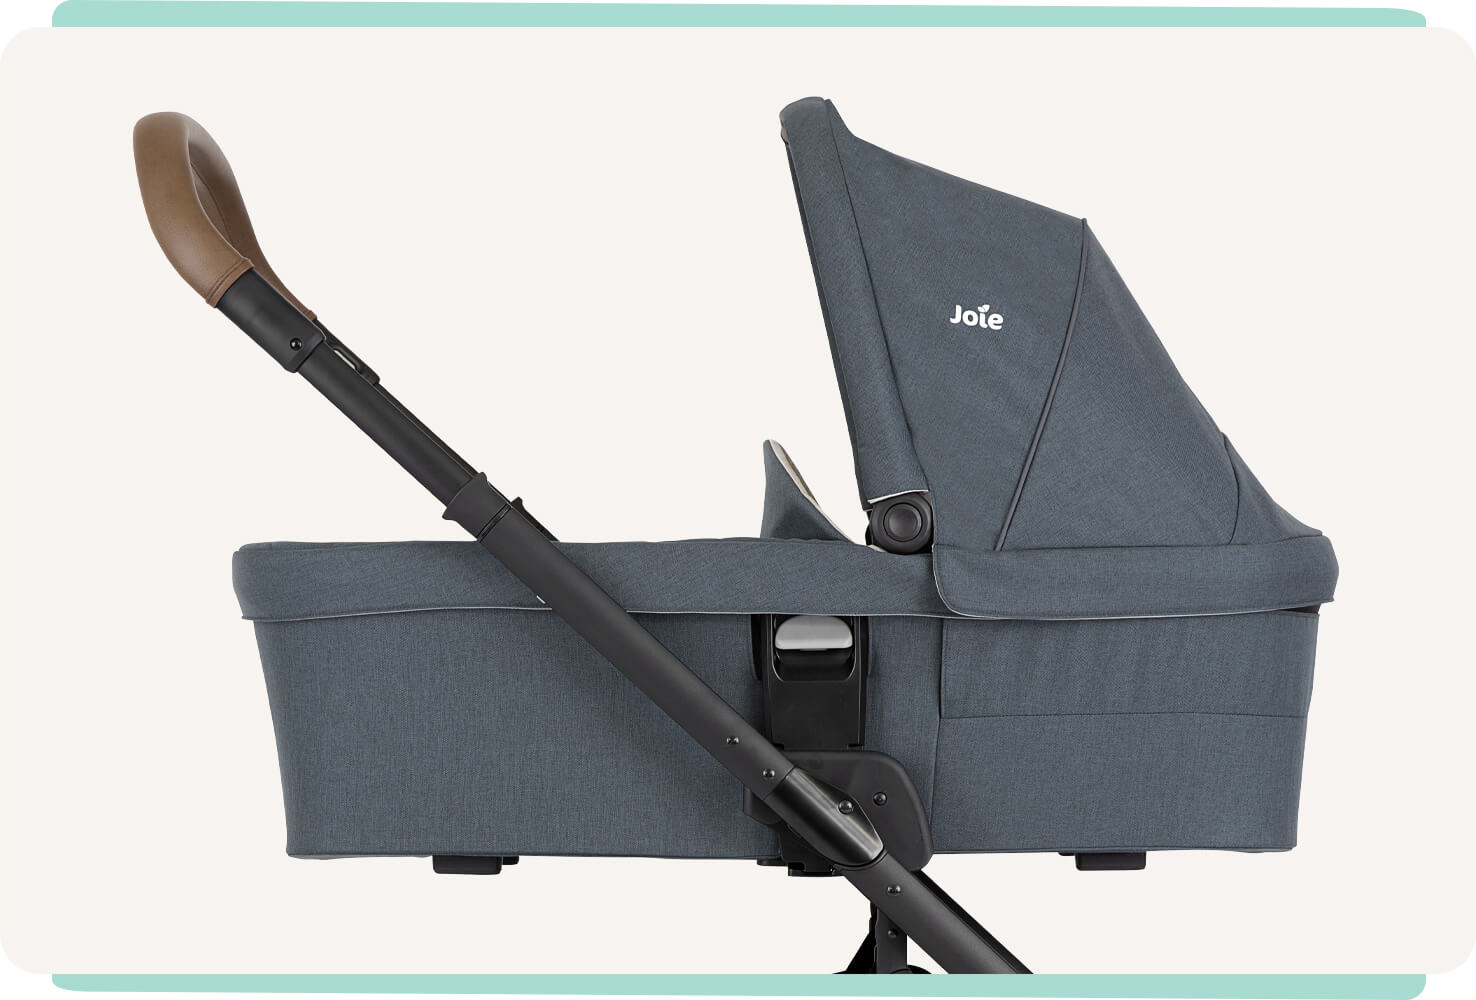 The Joie Chrome DLX pram with carry cot in blue at an angle facing to the right.
